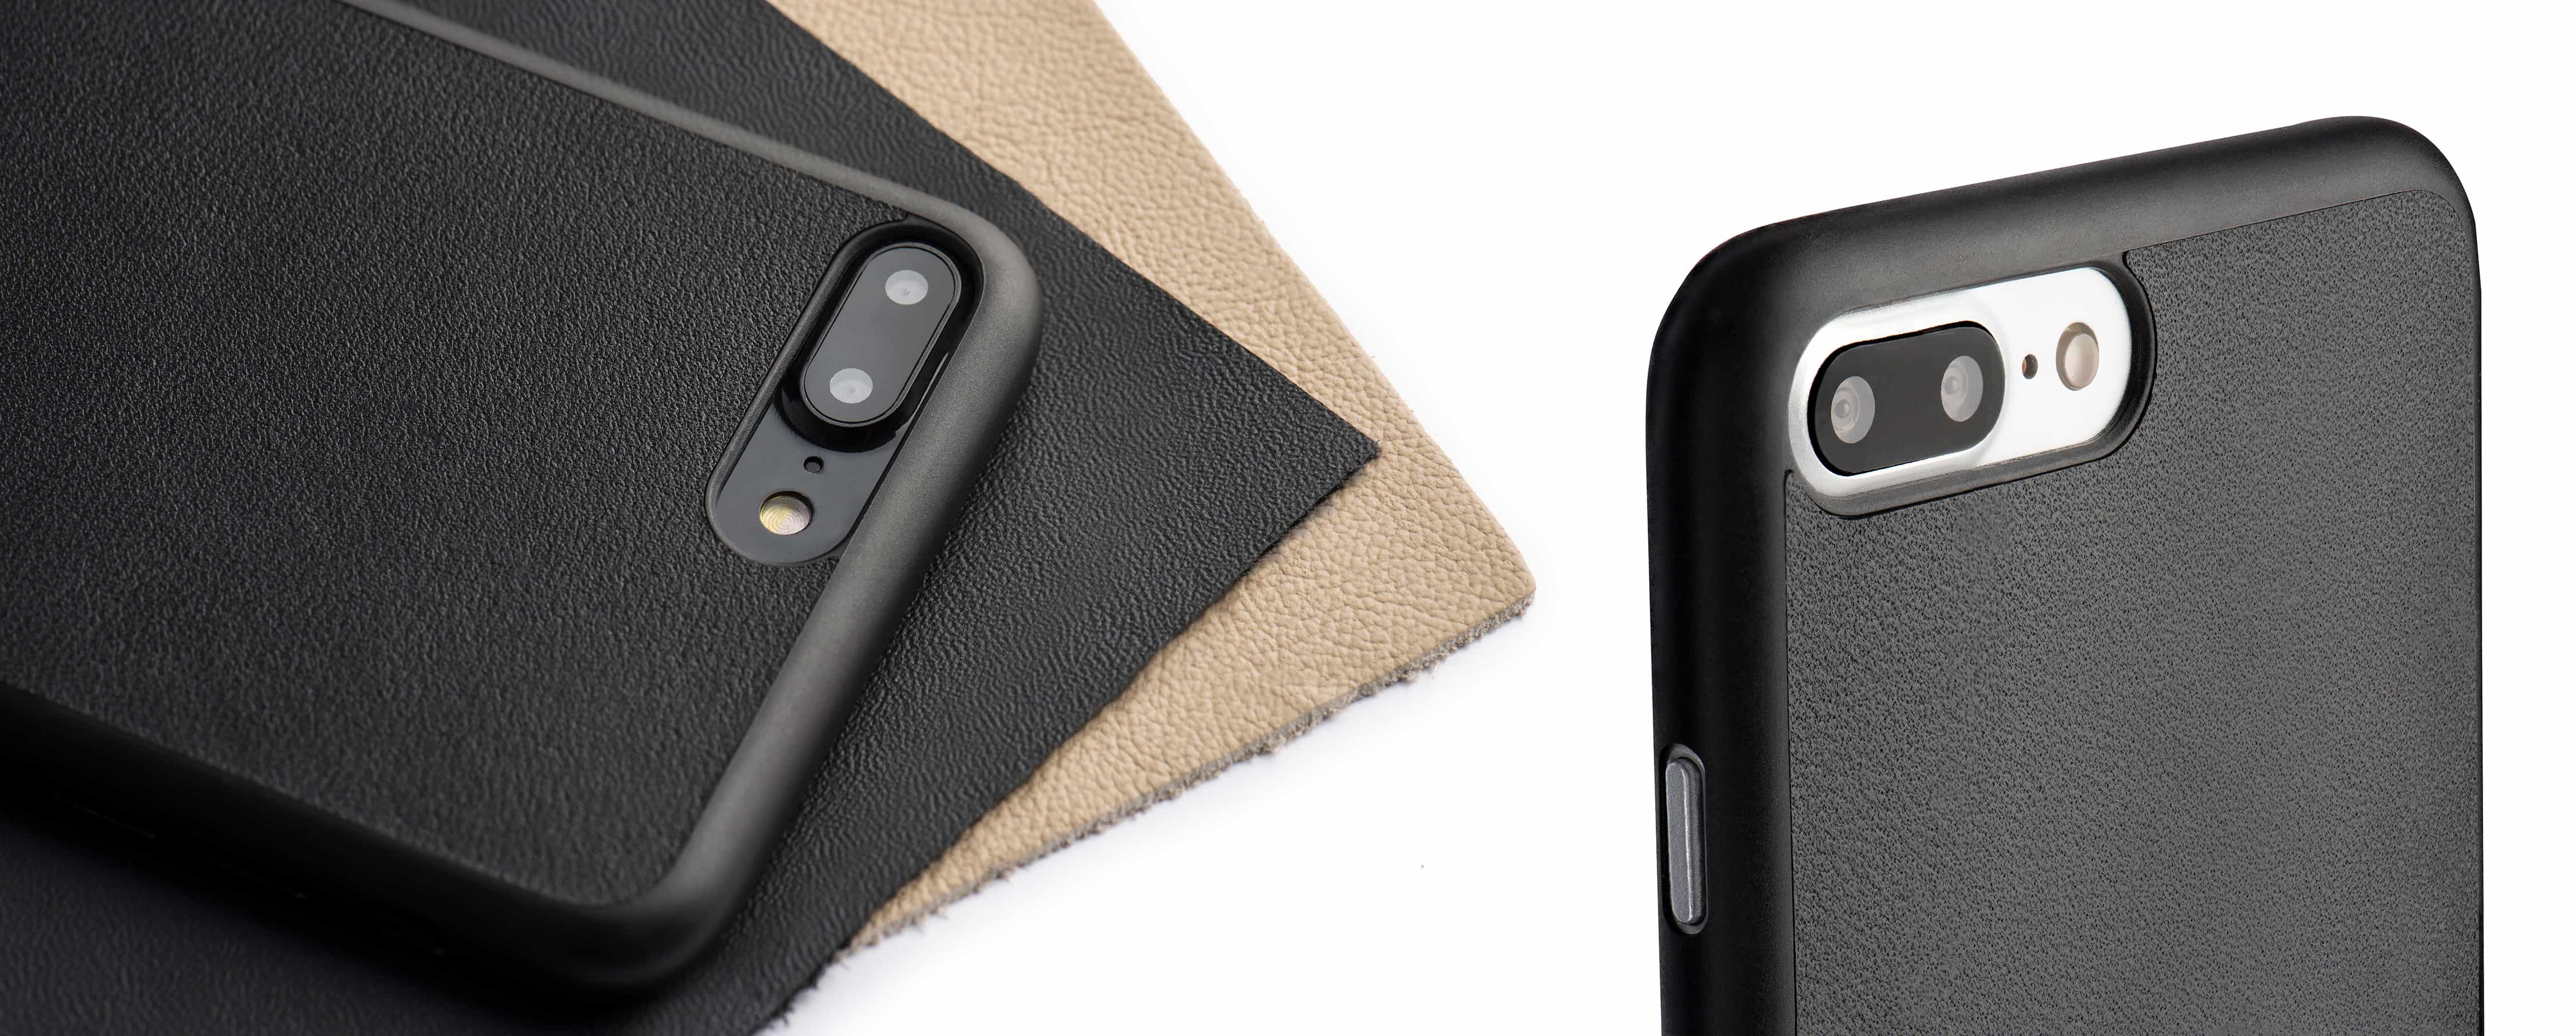 Totallee thin leather iPhone case